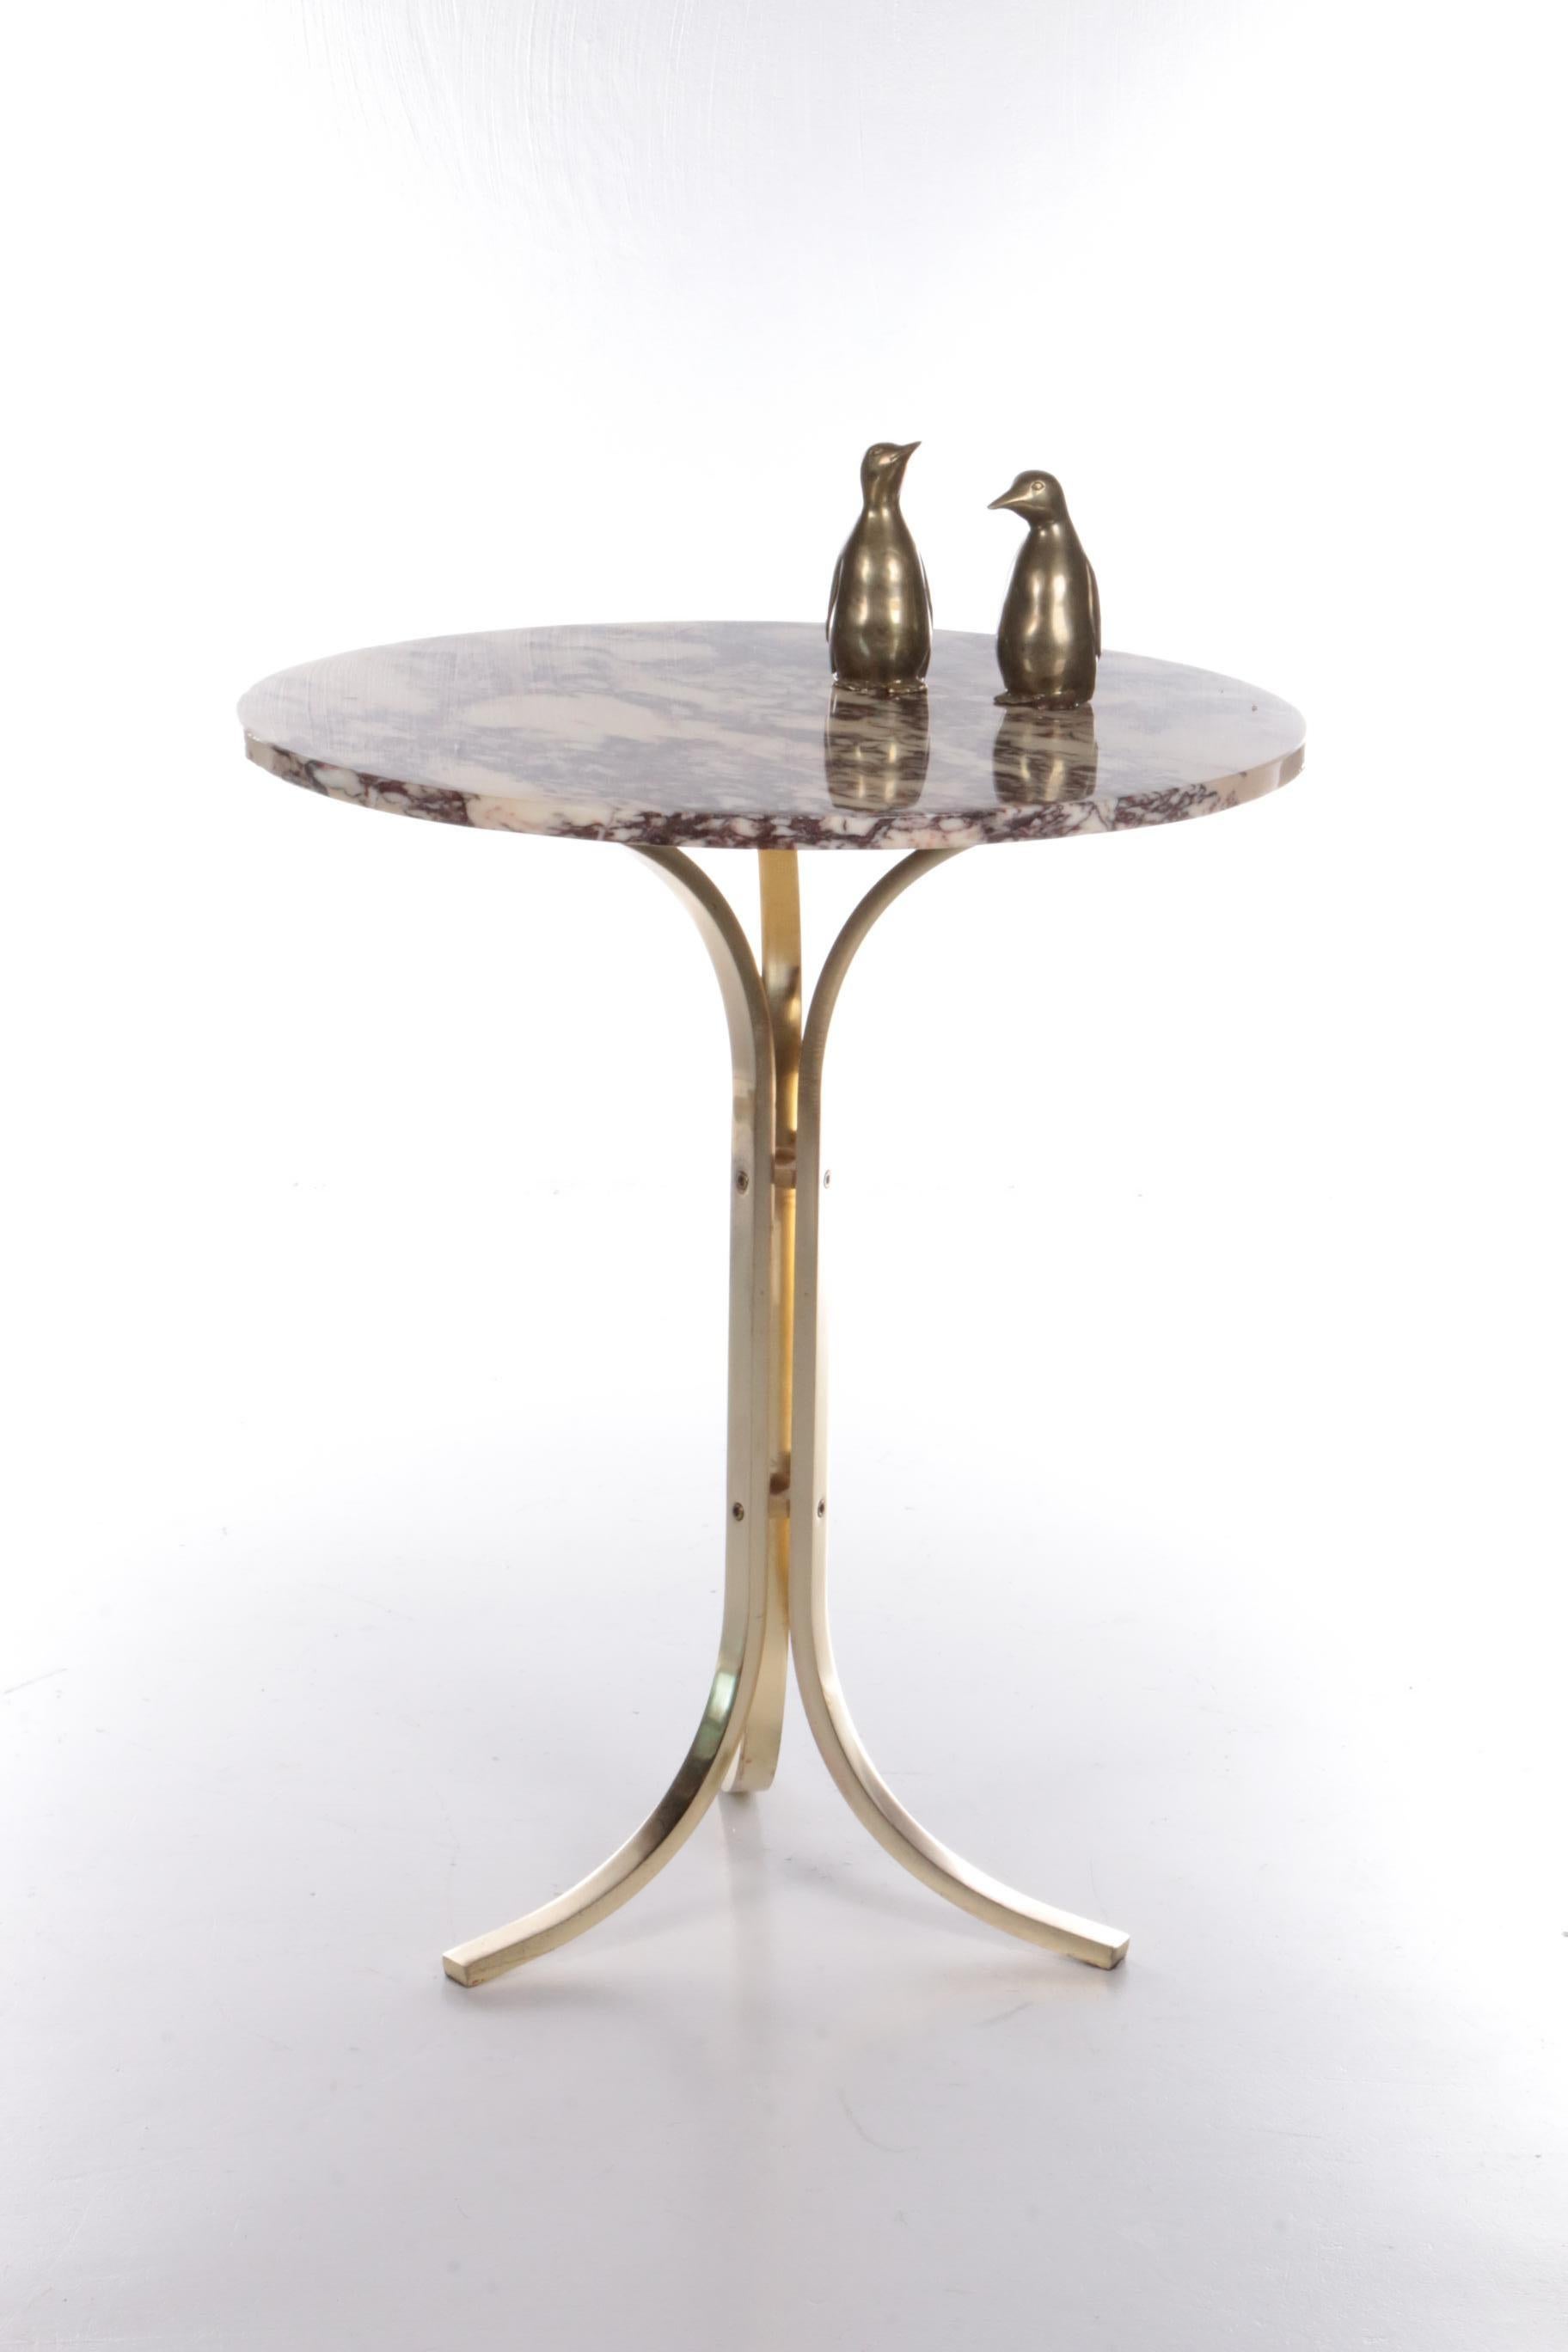 This is a nice round table, the base is made of beautiful brass and the marble top is loose on it. A chic addition to any interior, very suitable as a side or plant table.

The table top is gray and off-white. Easy to place due to its modest